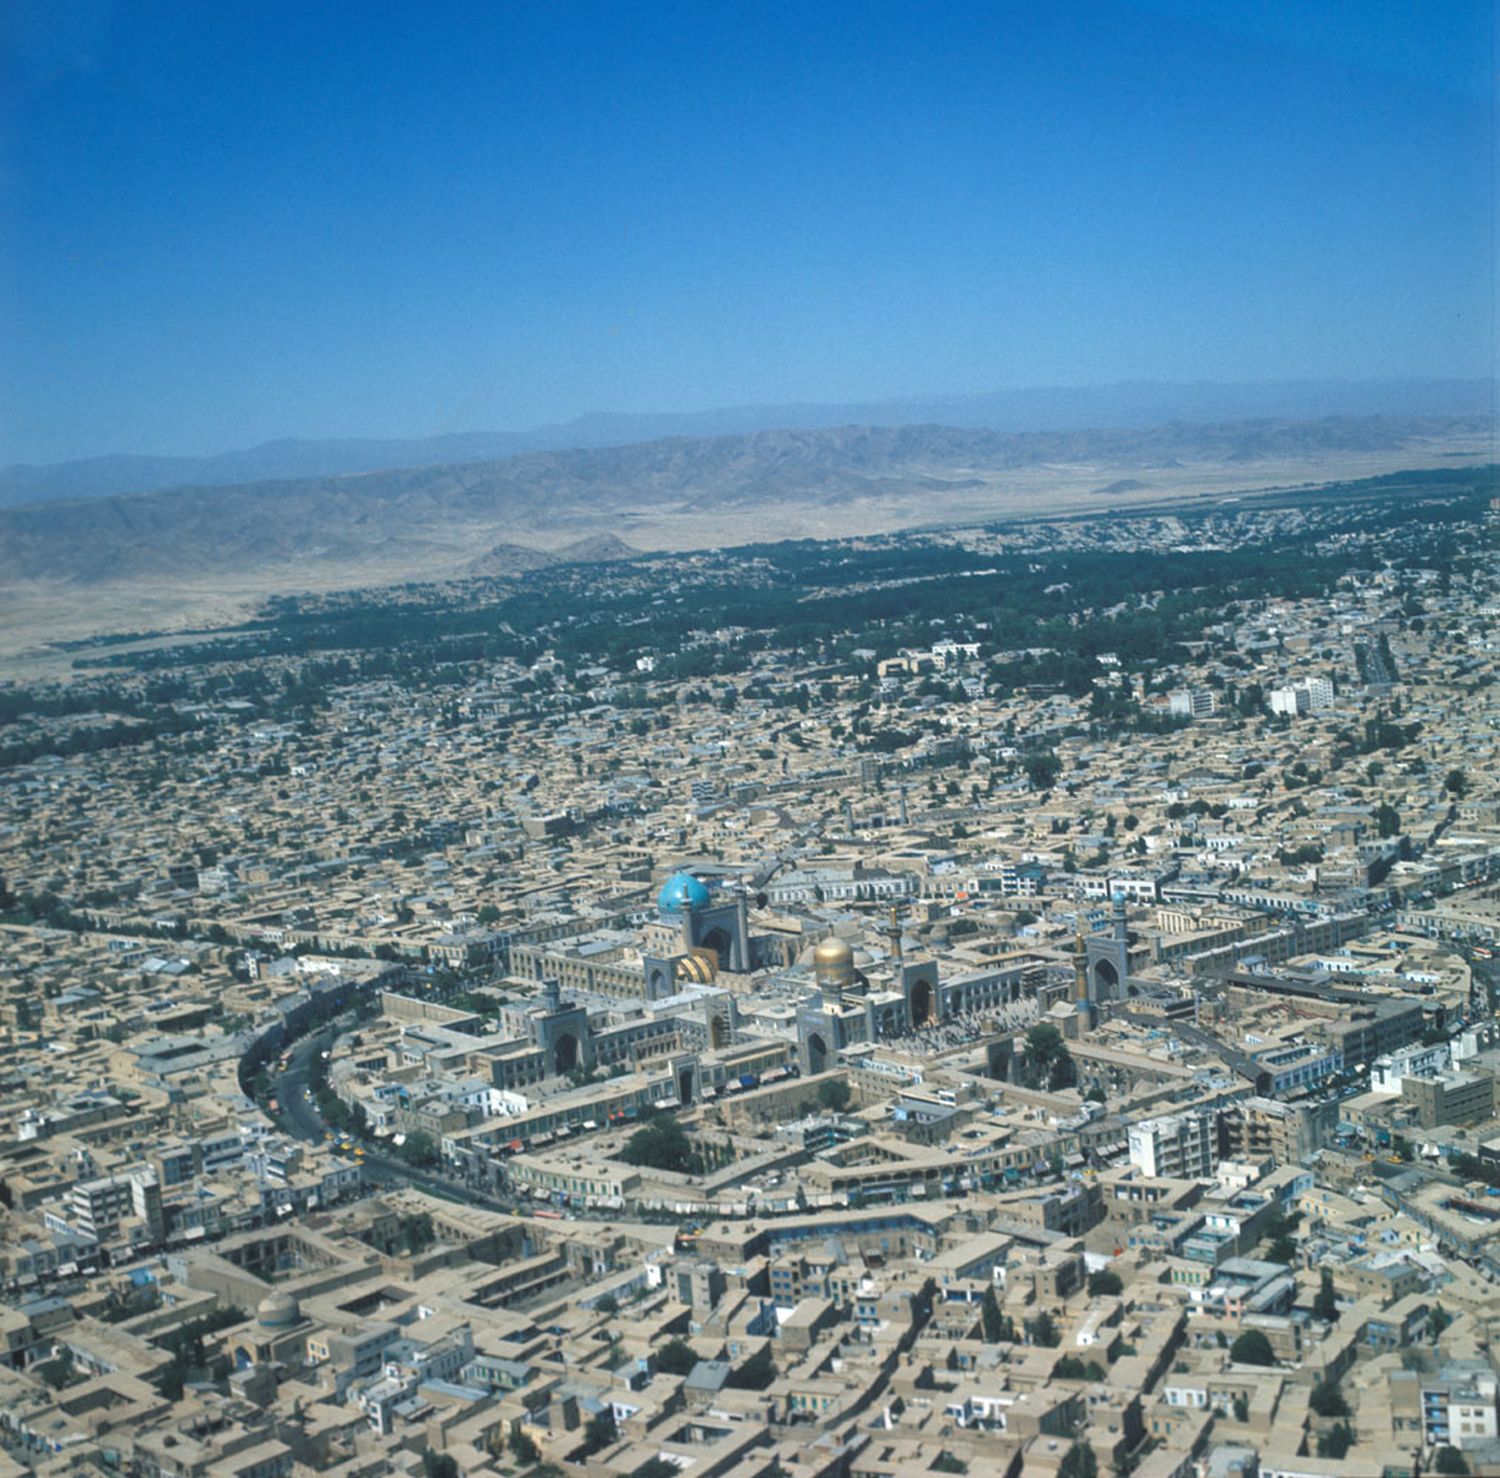  Mashhad - Aerial view over center of Mashhad, Iran from east. The Imam Riza Shrine Complex is visible in center.